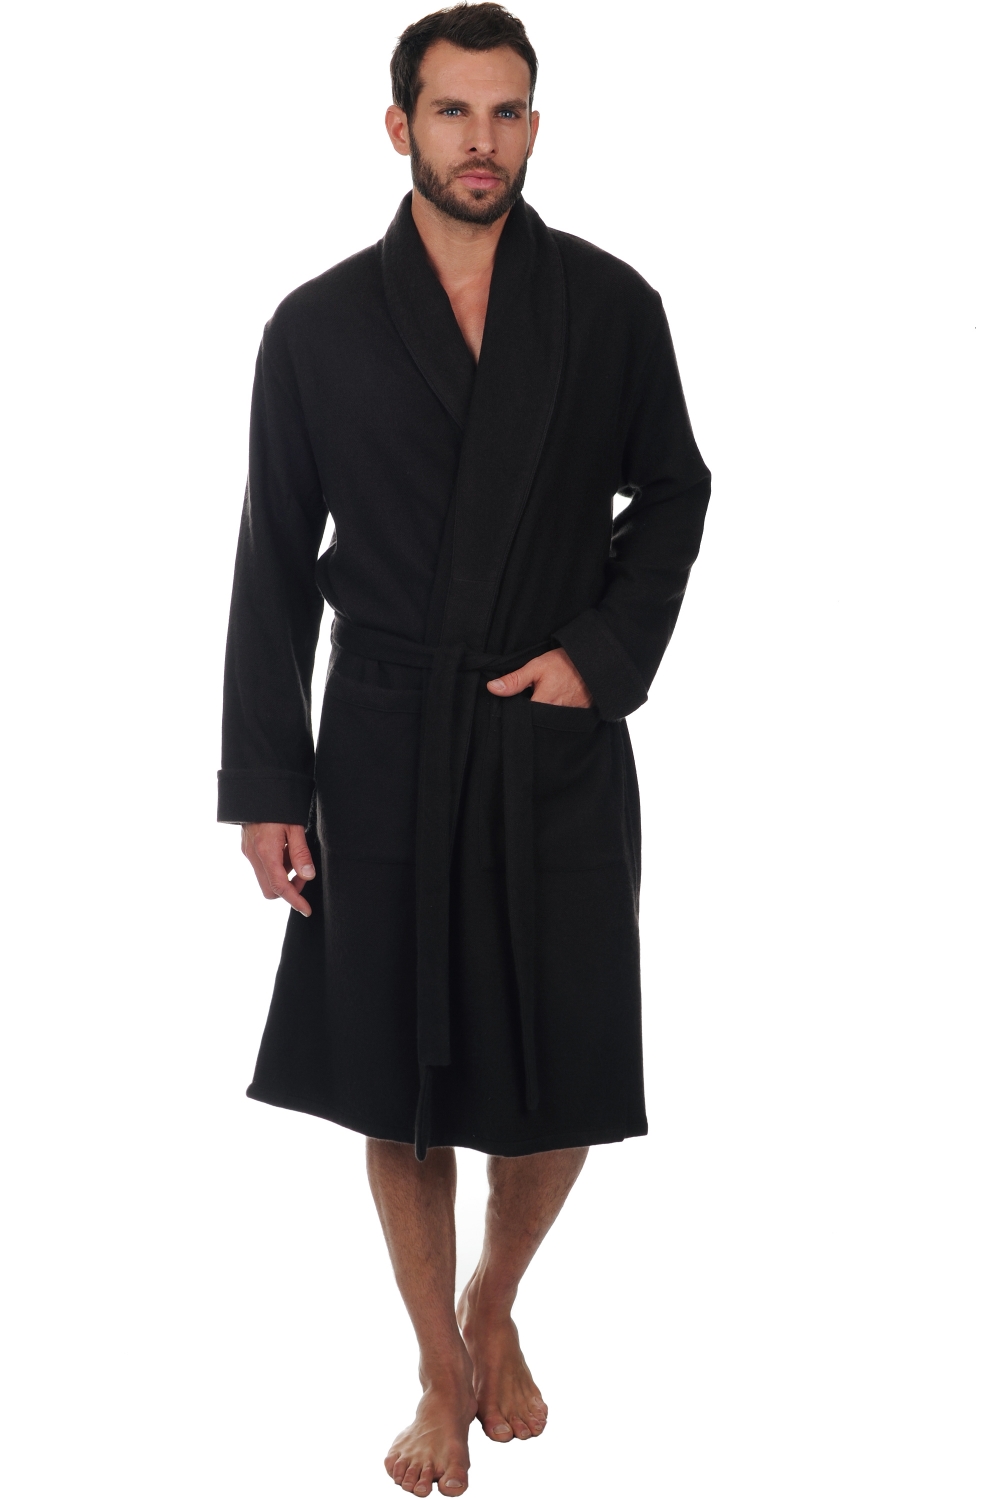 Cashmere men dressing gown working licorice s3